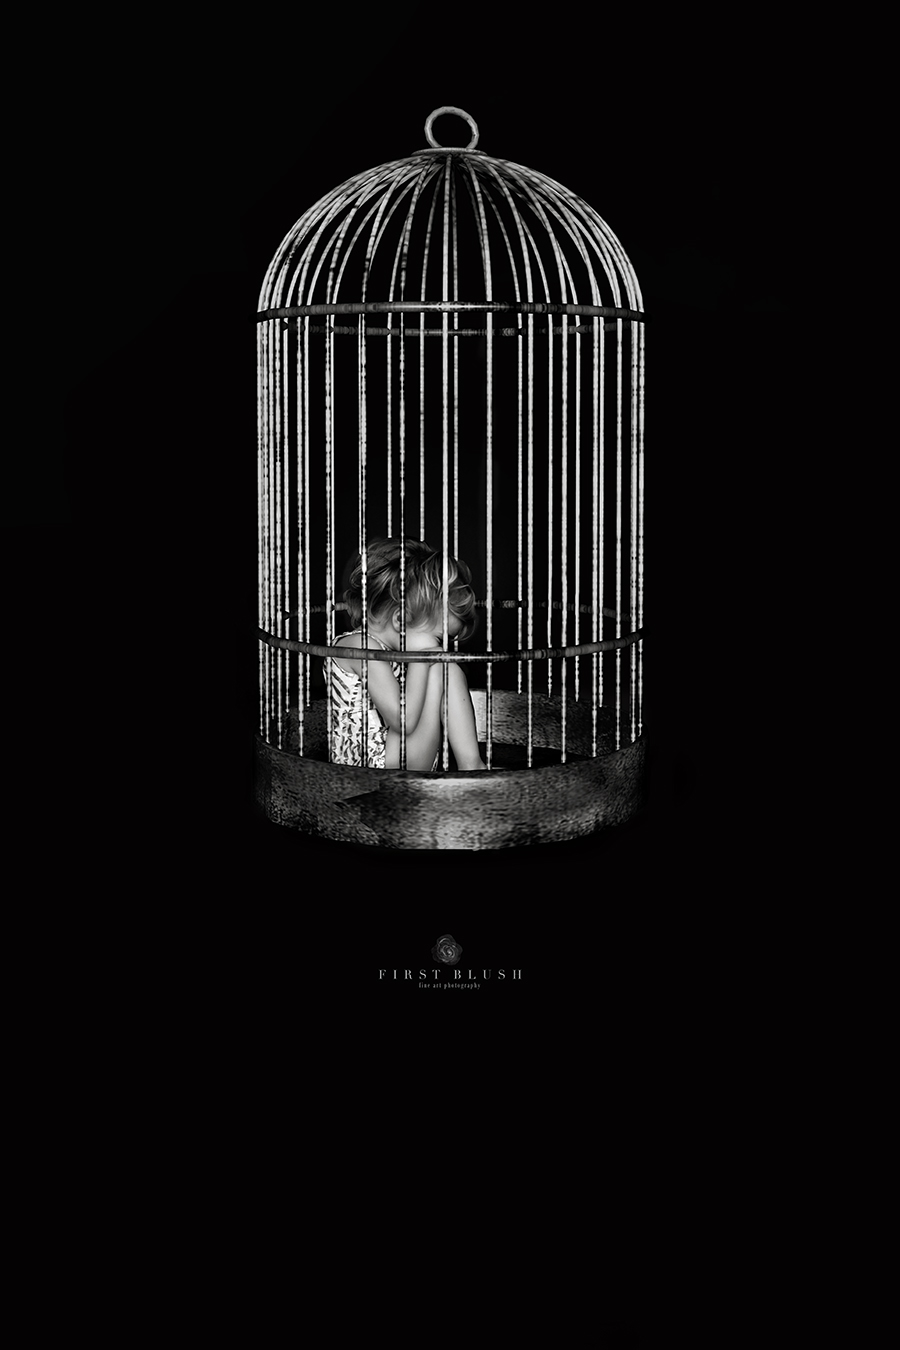 Child trafficking and a child that has been caged in an old style bird cage waiting.